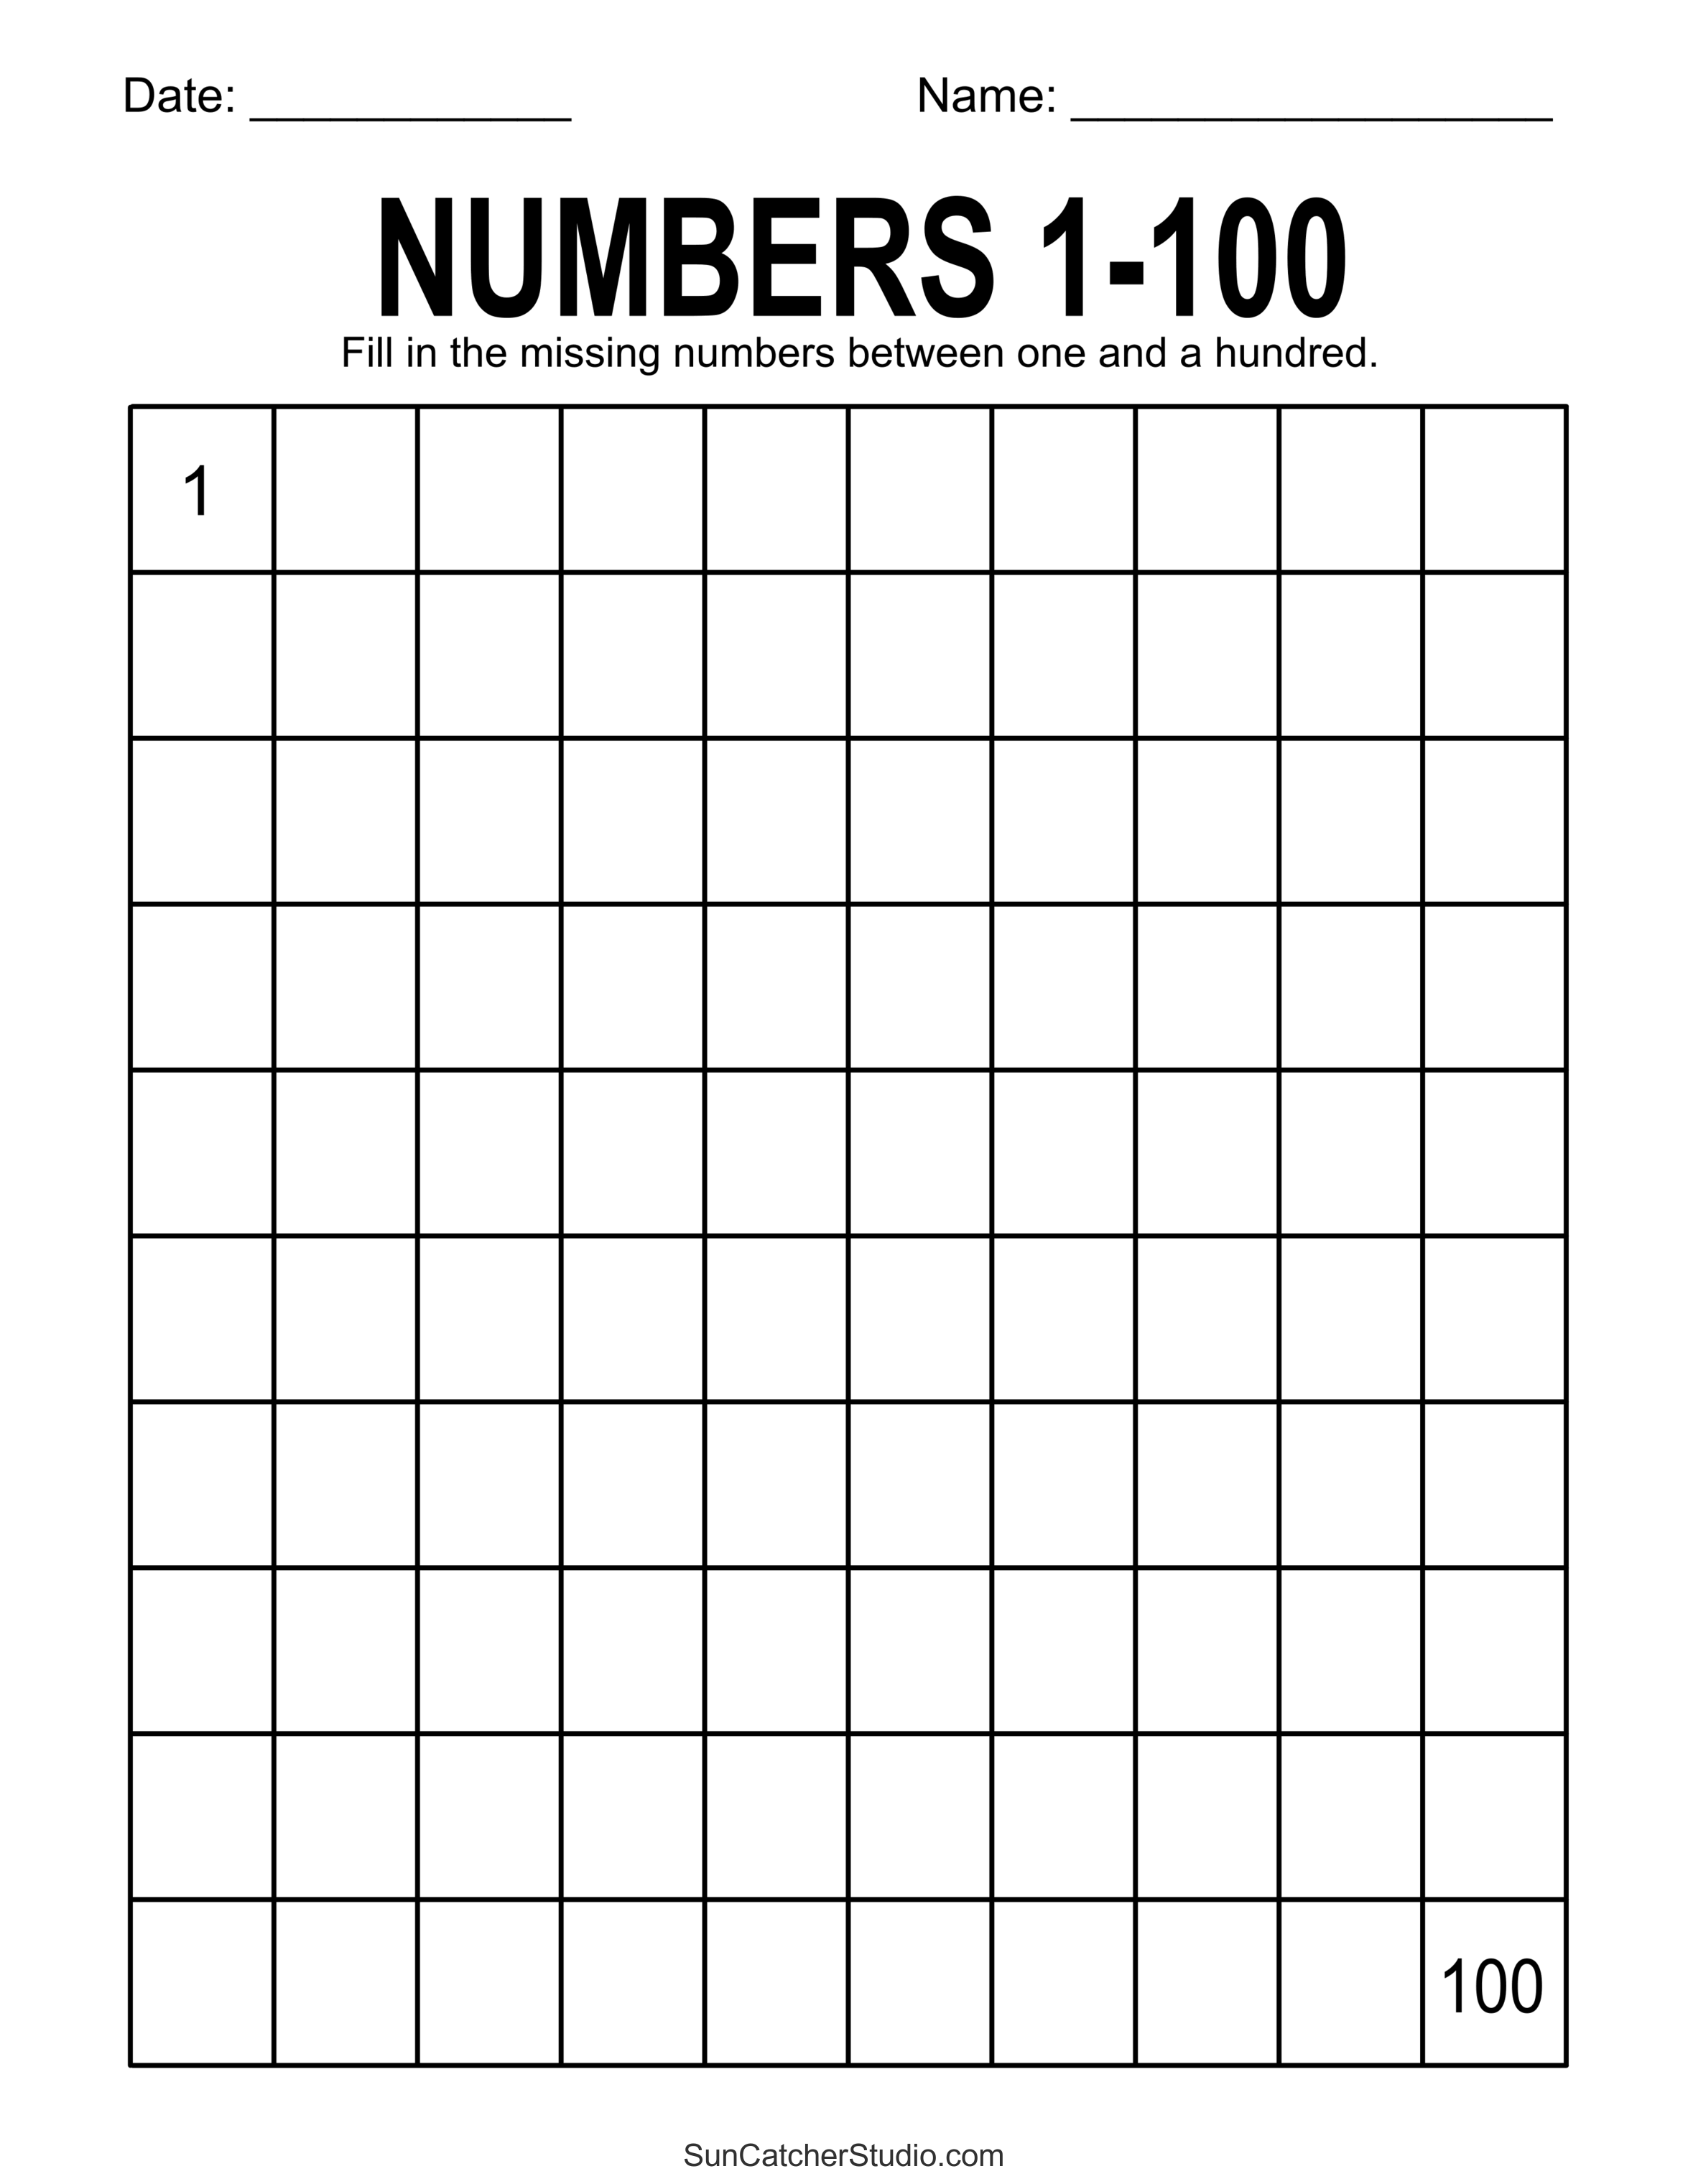 Numbers in Words - Number Names 1 to 100